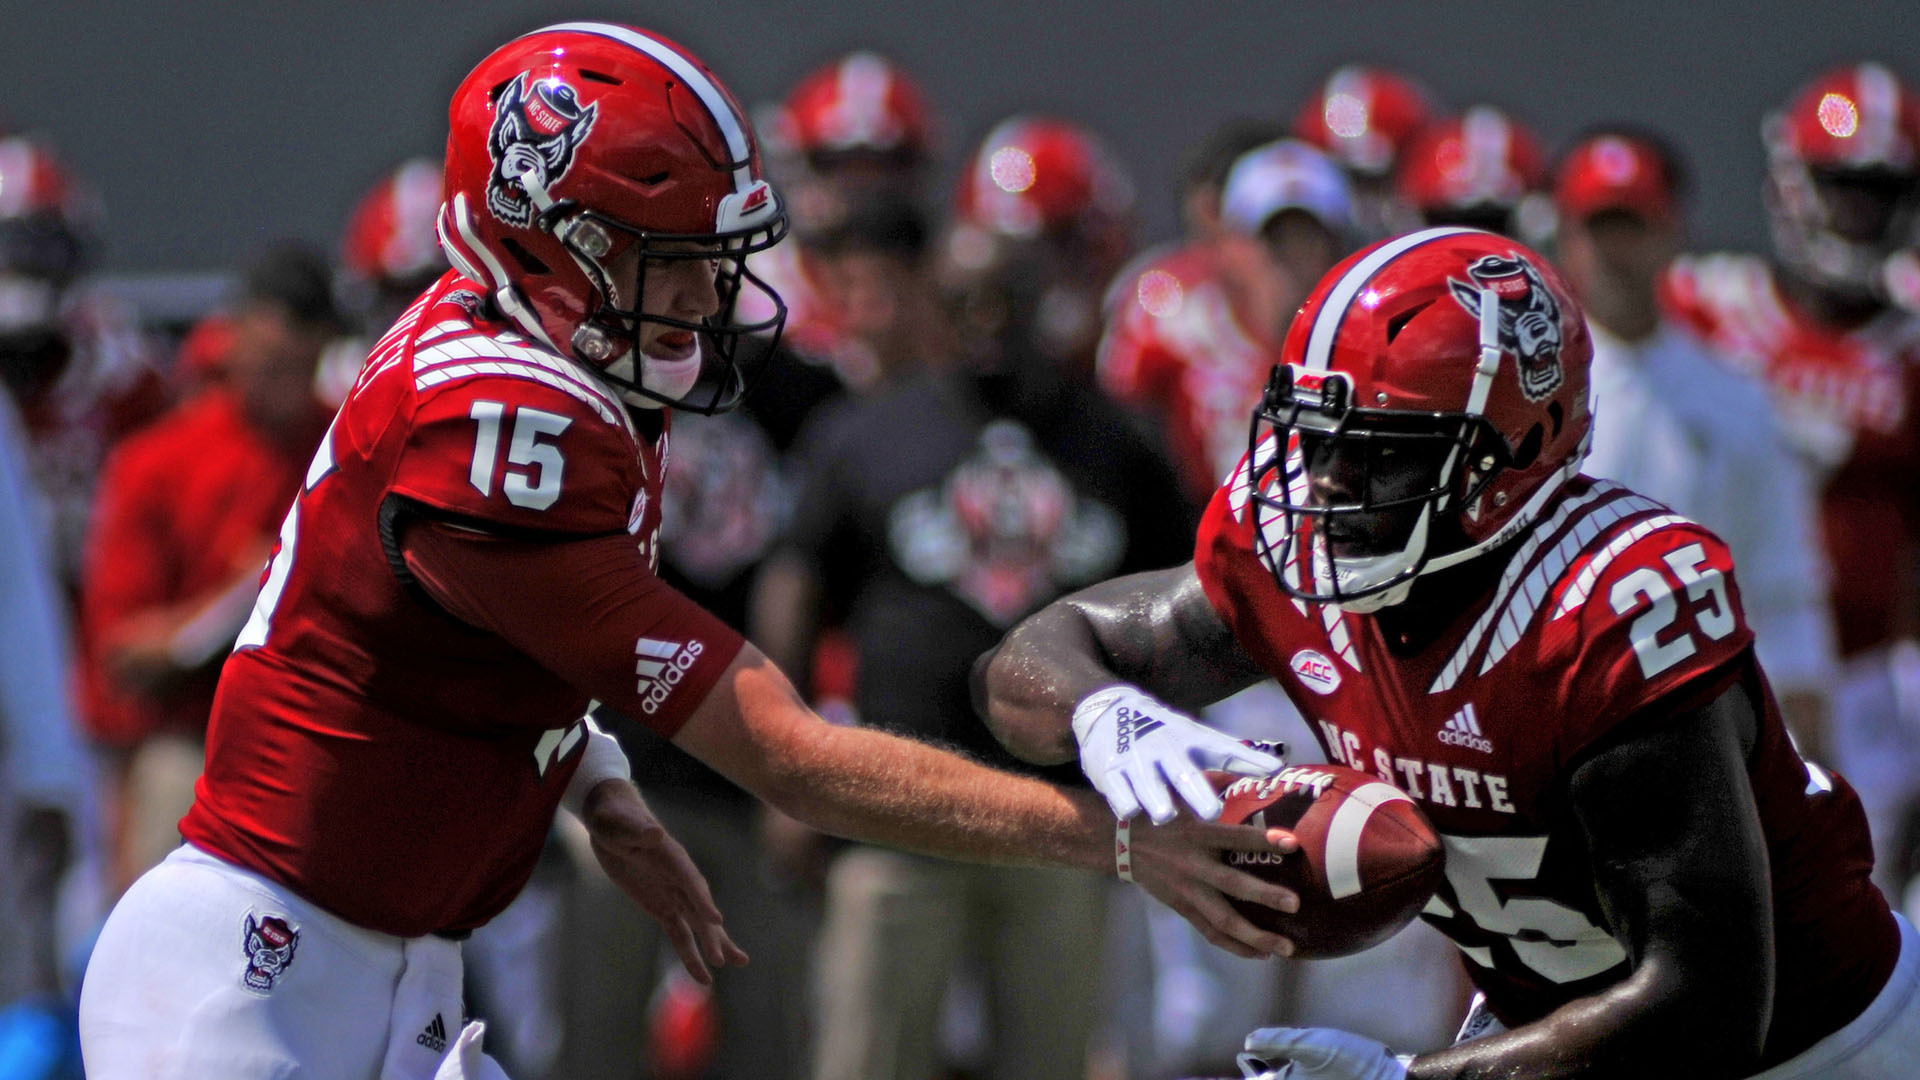 NC State football players on the field during a game.